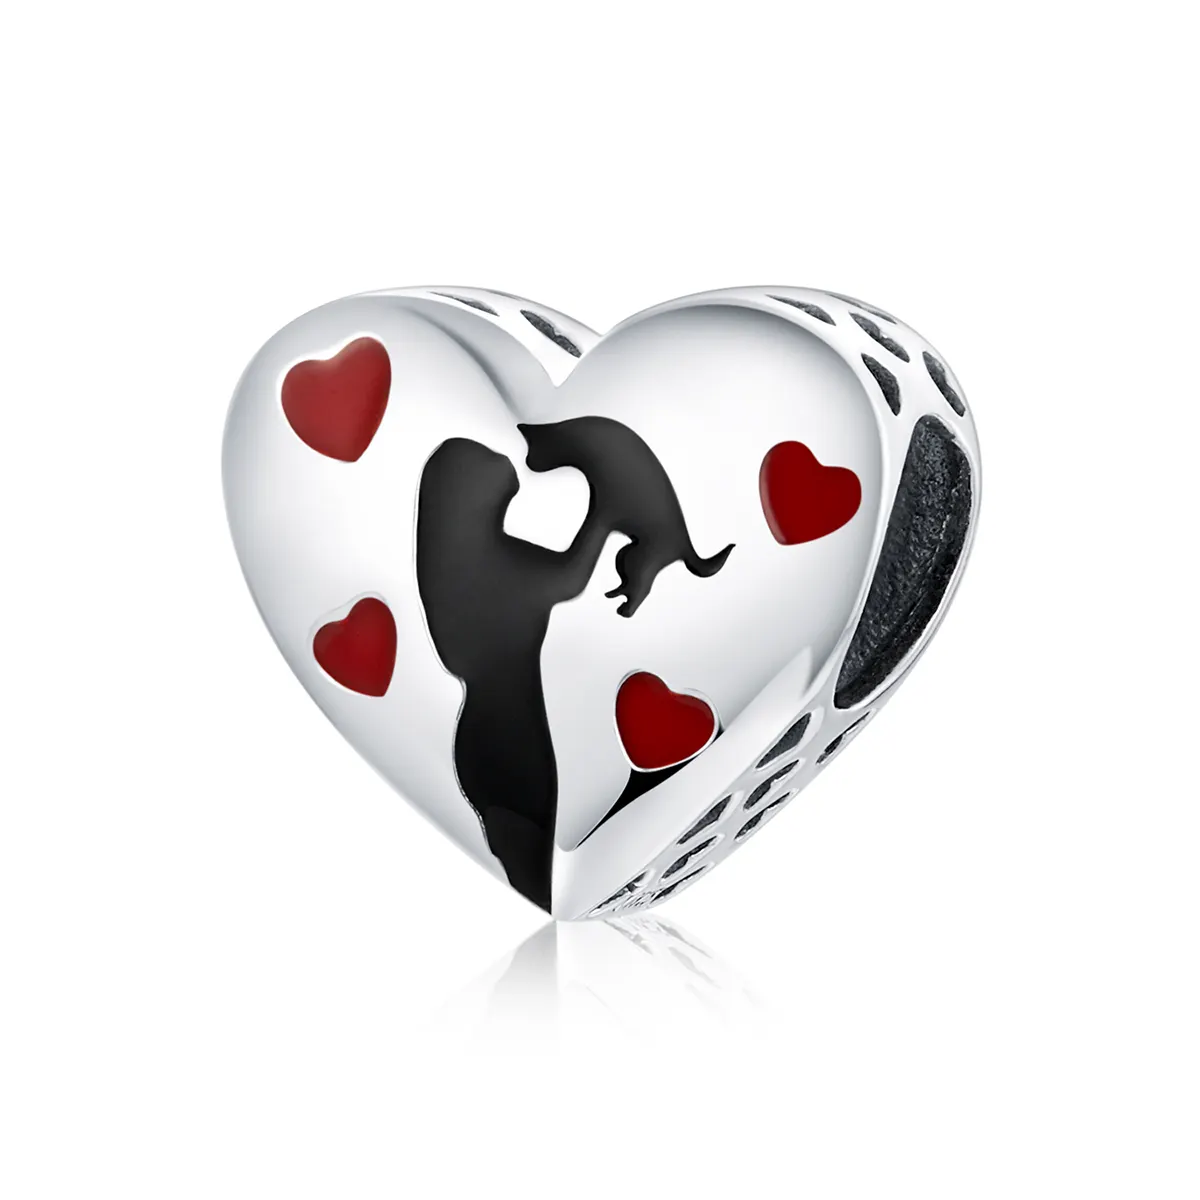 LEICARE Enamel Heart Pendant Charm 925 Sterling Silver Designer Girl and Cat Kitty Charm Bead for DIY Jewelry Making